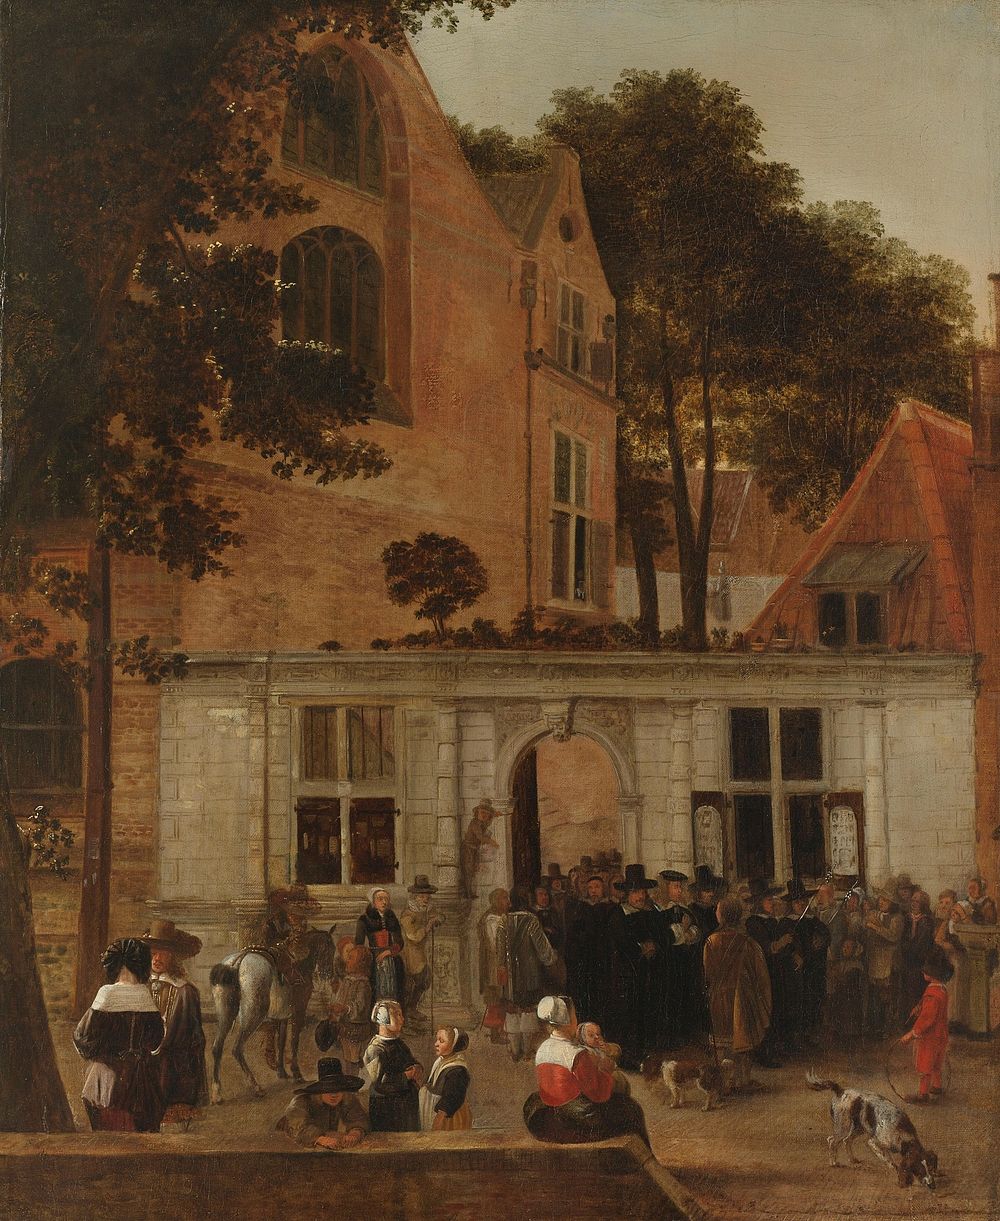 The Conferring of a Degree at the University of Leiden about 1650 (c. 1650 - c. 1660) by Hendrick van der Burch